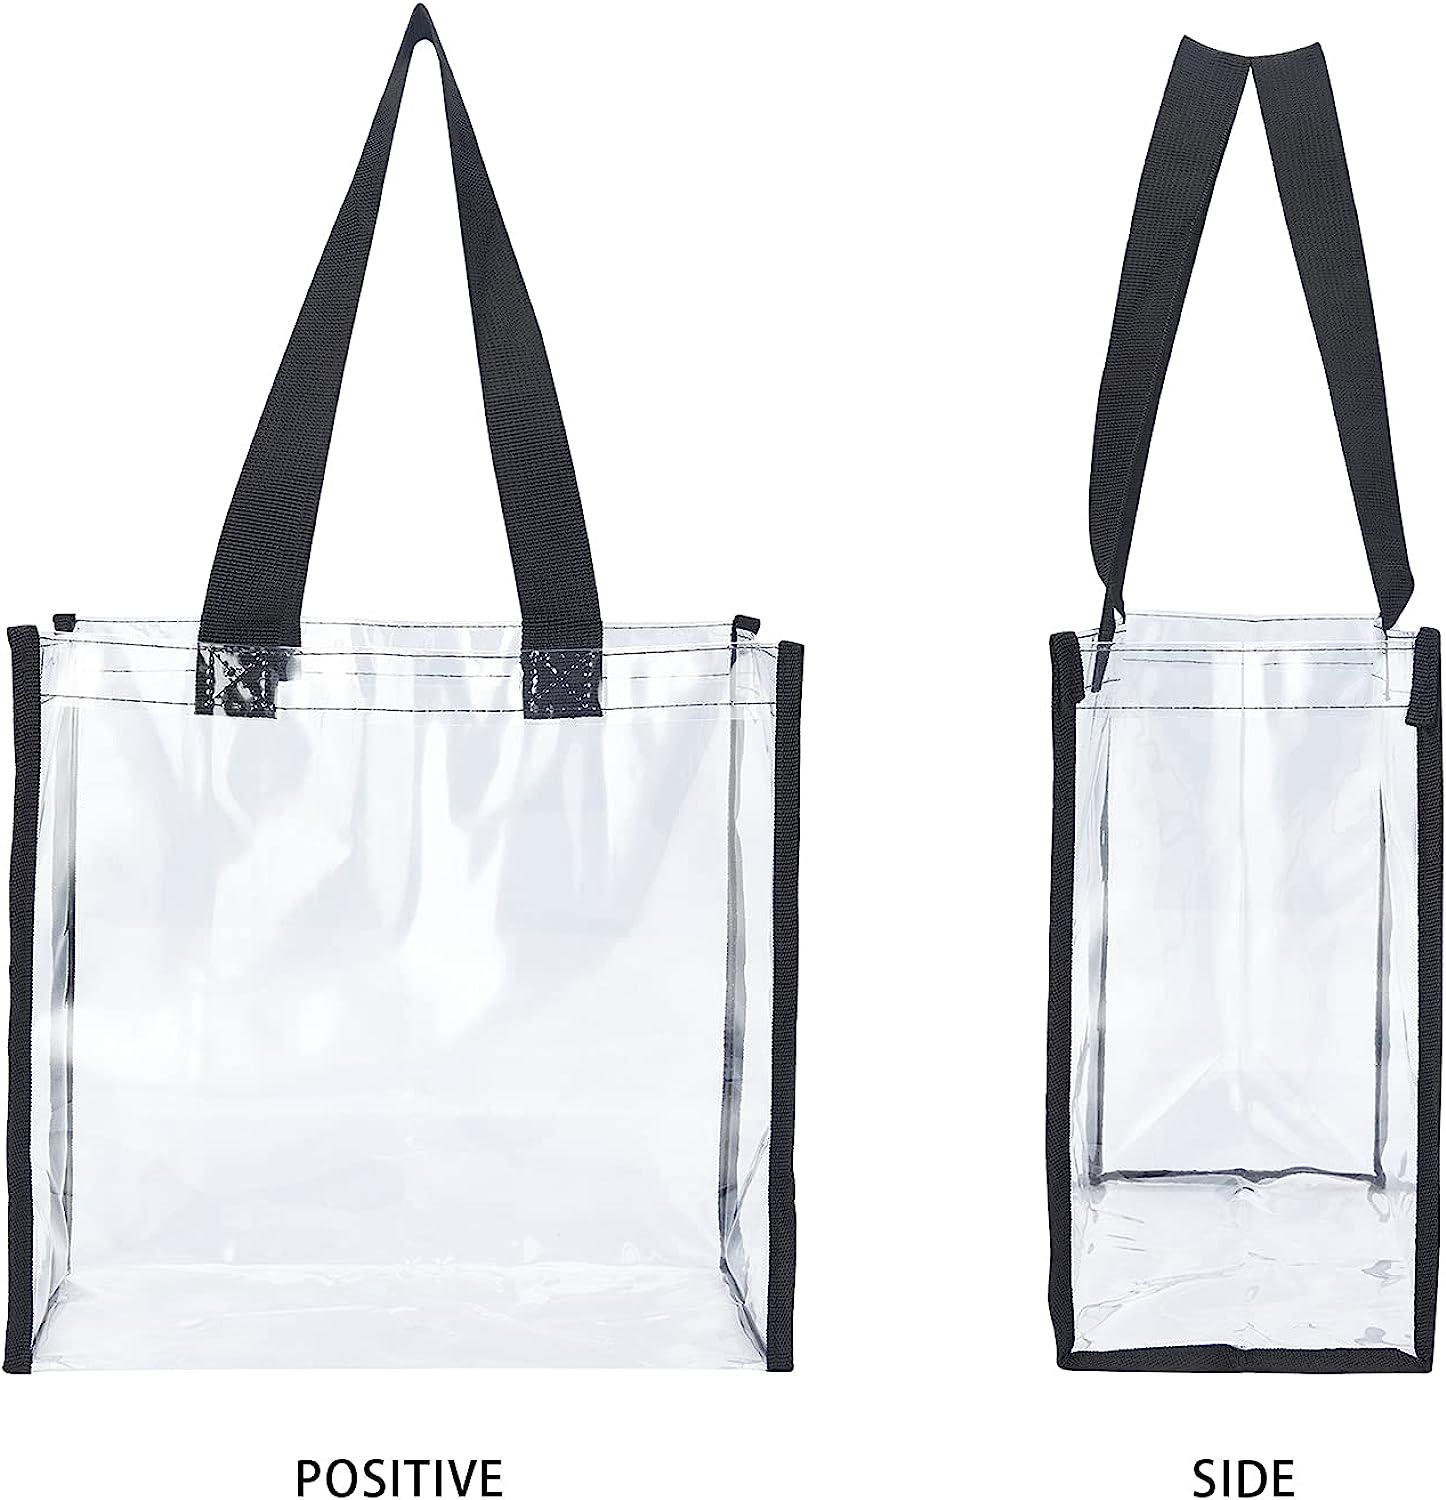  Clear Bag Stadium Approved,Security Approved Clear Tote Bag-12X12X6  : Sports & Outdoors